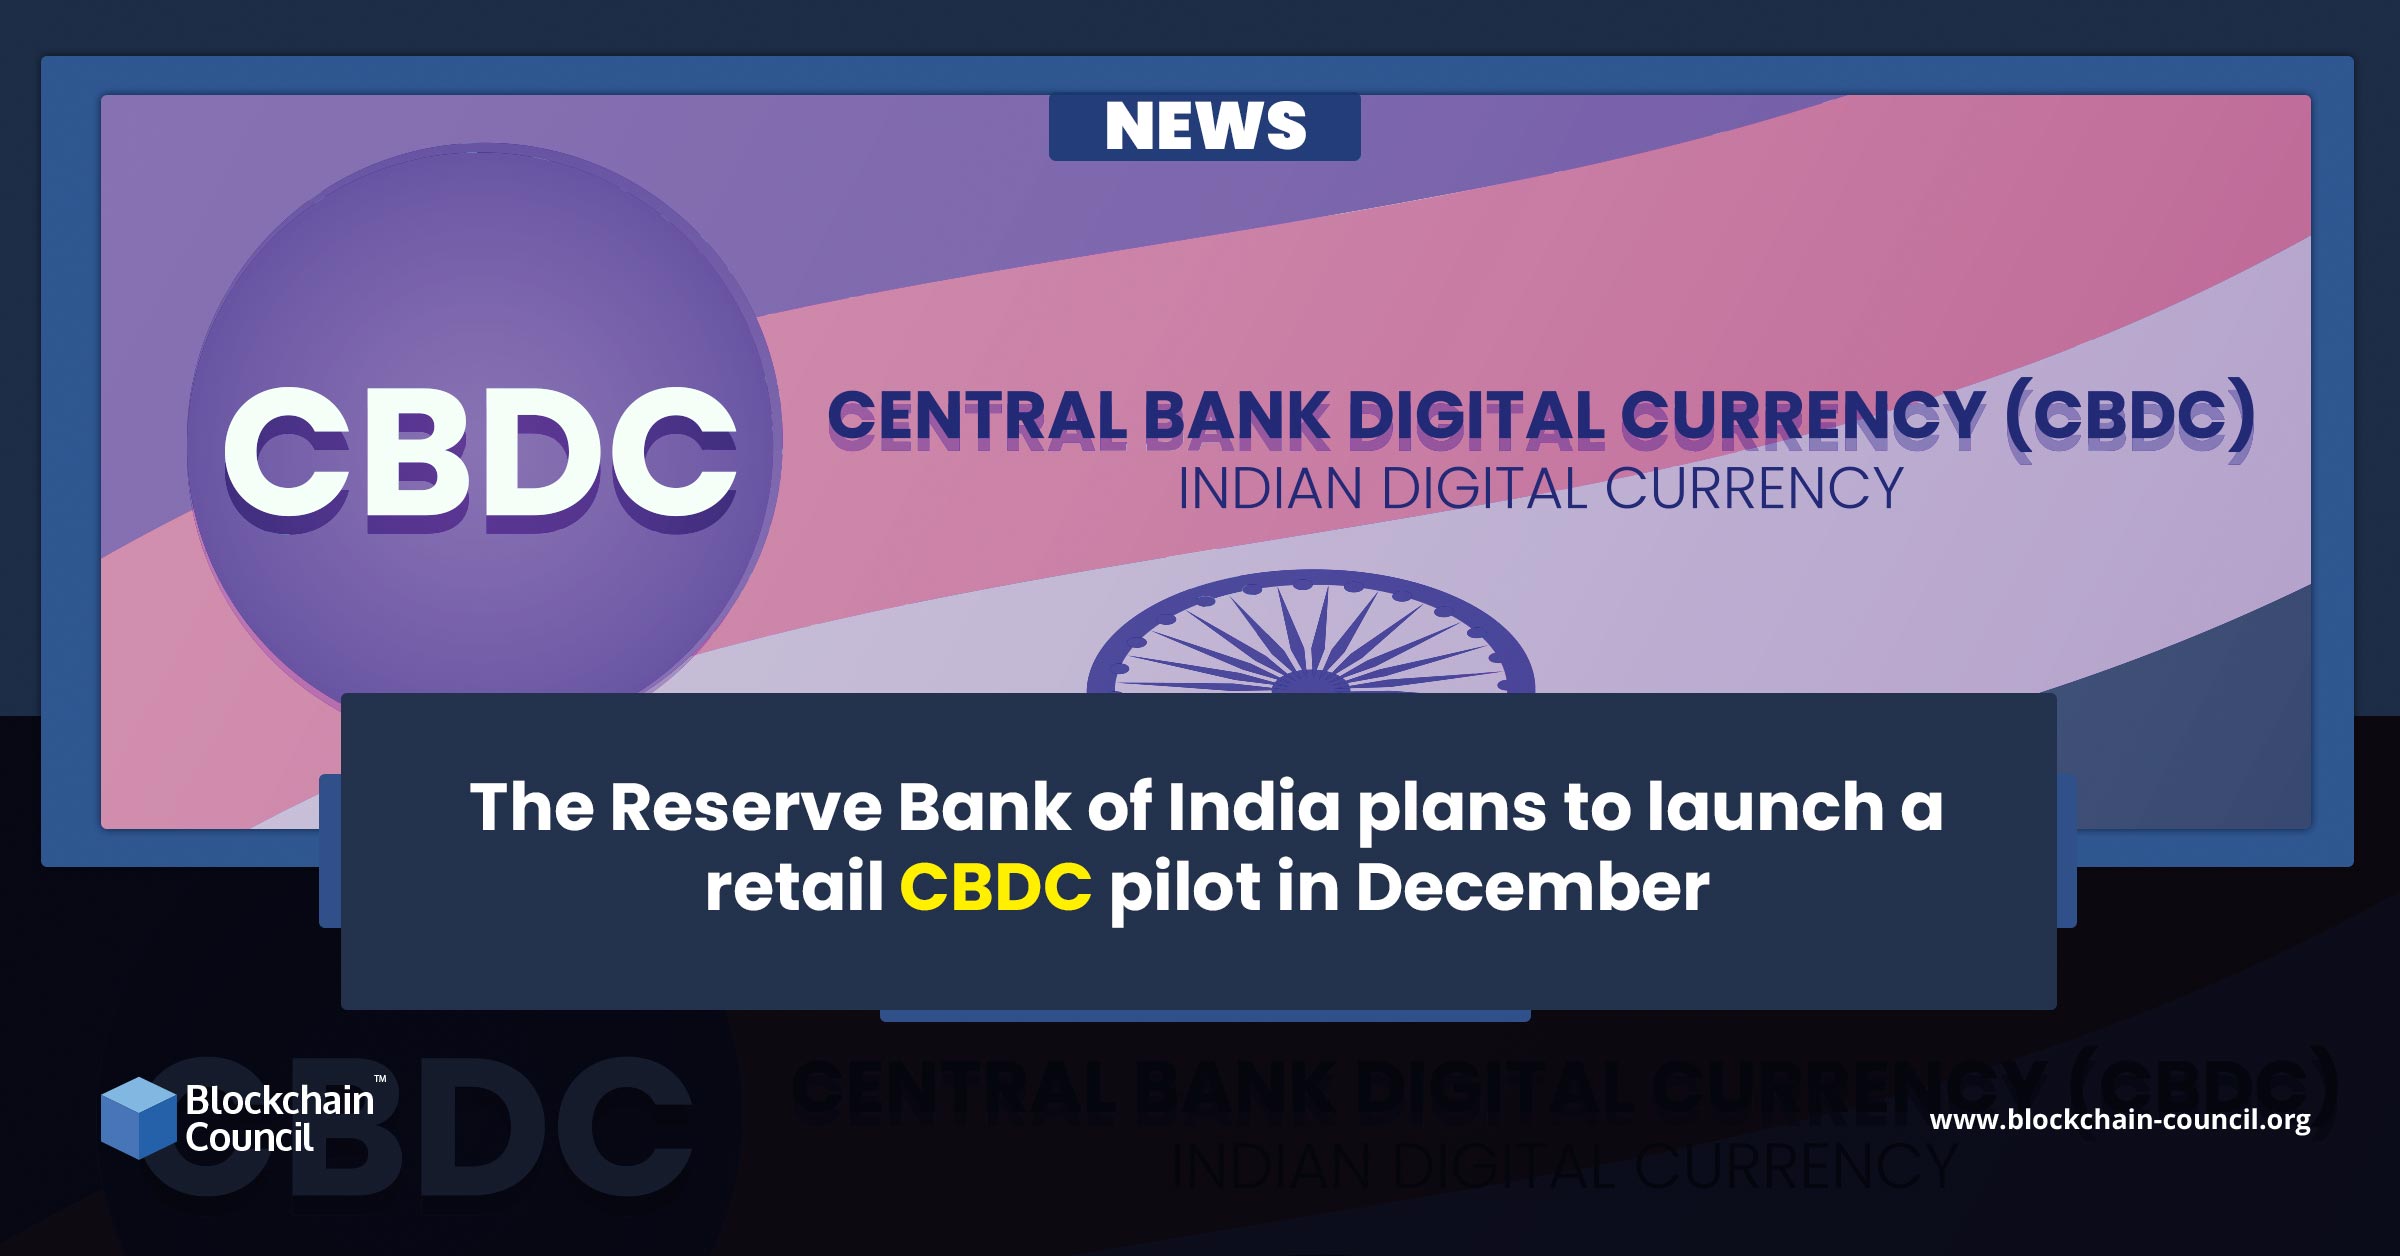 The Reserve Bank of India plans to launch a retail CBDC pilot in December